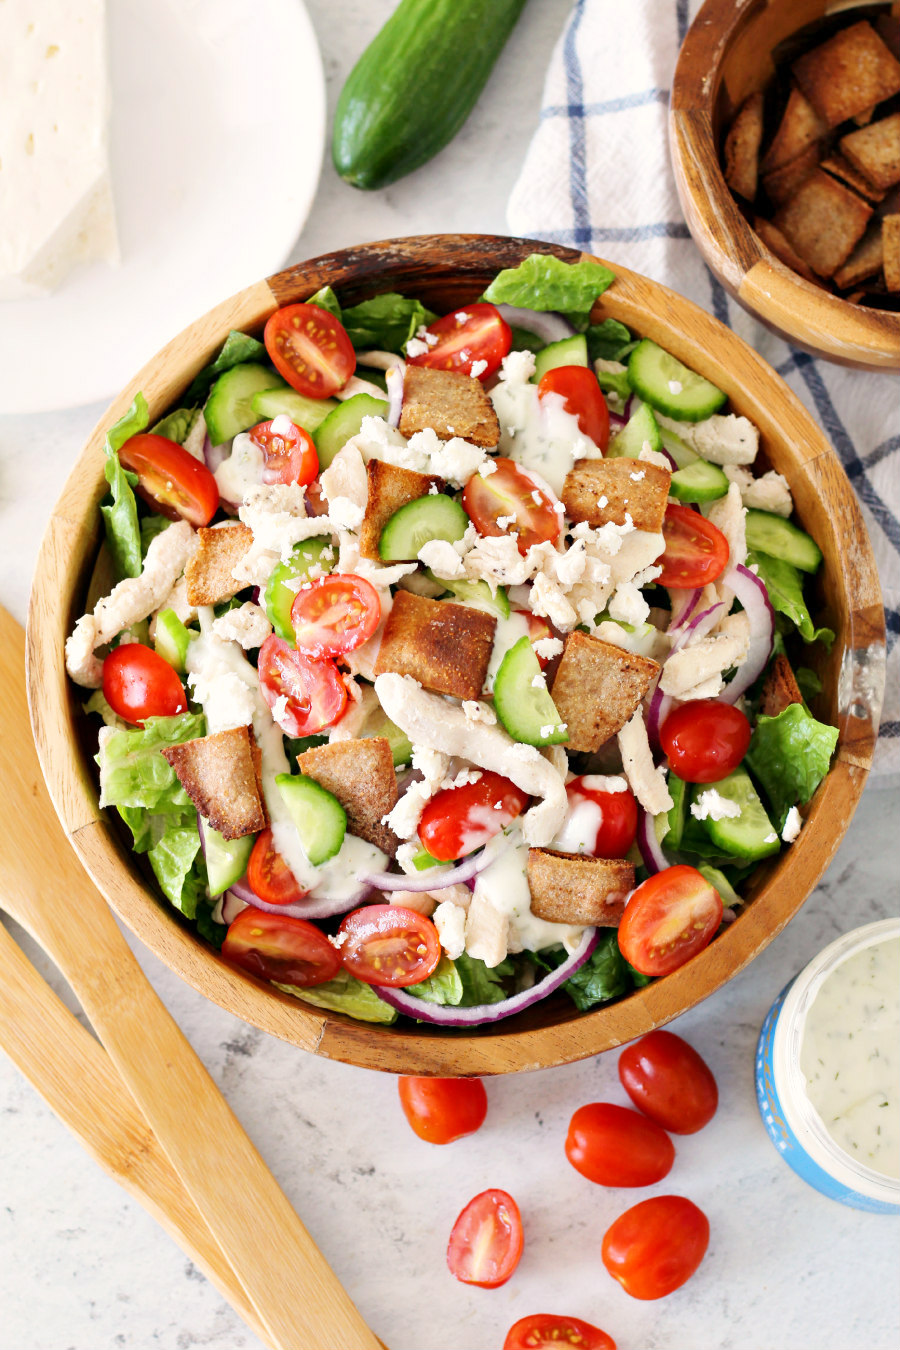 Chicken Gyro Salad with Pita Croutons in a wooden salad bowl. Wooden utensils, feta cheese, cucumber, pita croutons, tzatziki sauce, and cherry tomatoes in the background.